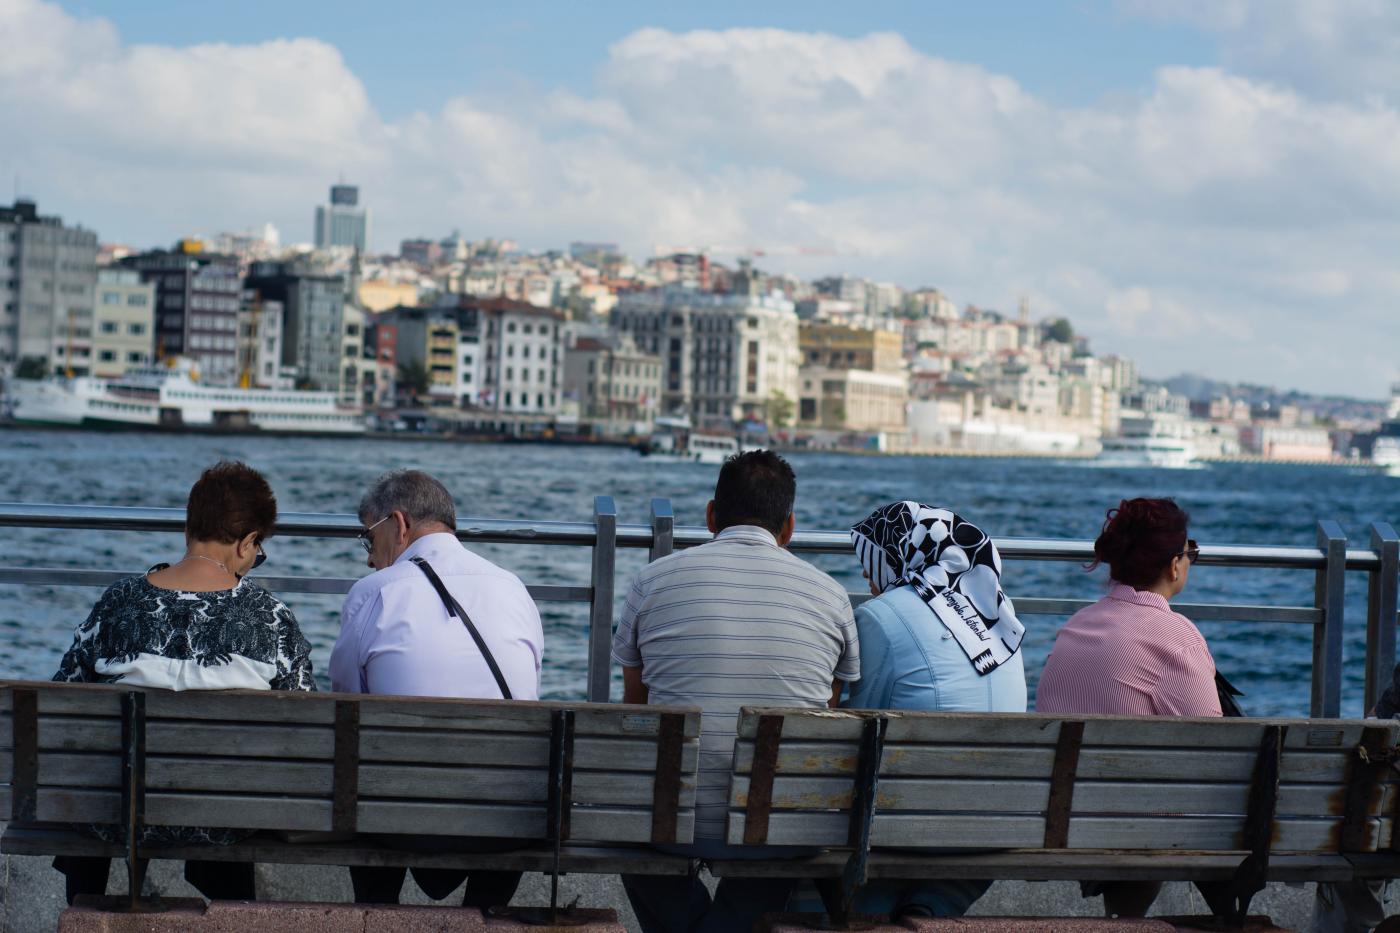 Men and women sit together on a bench in Istanbul, Turkey.